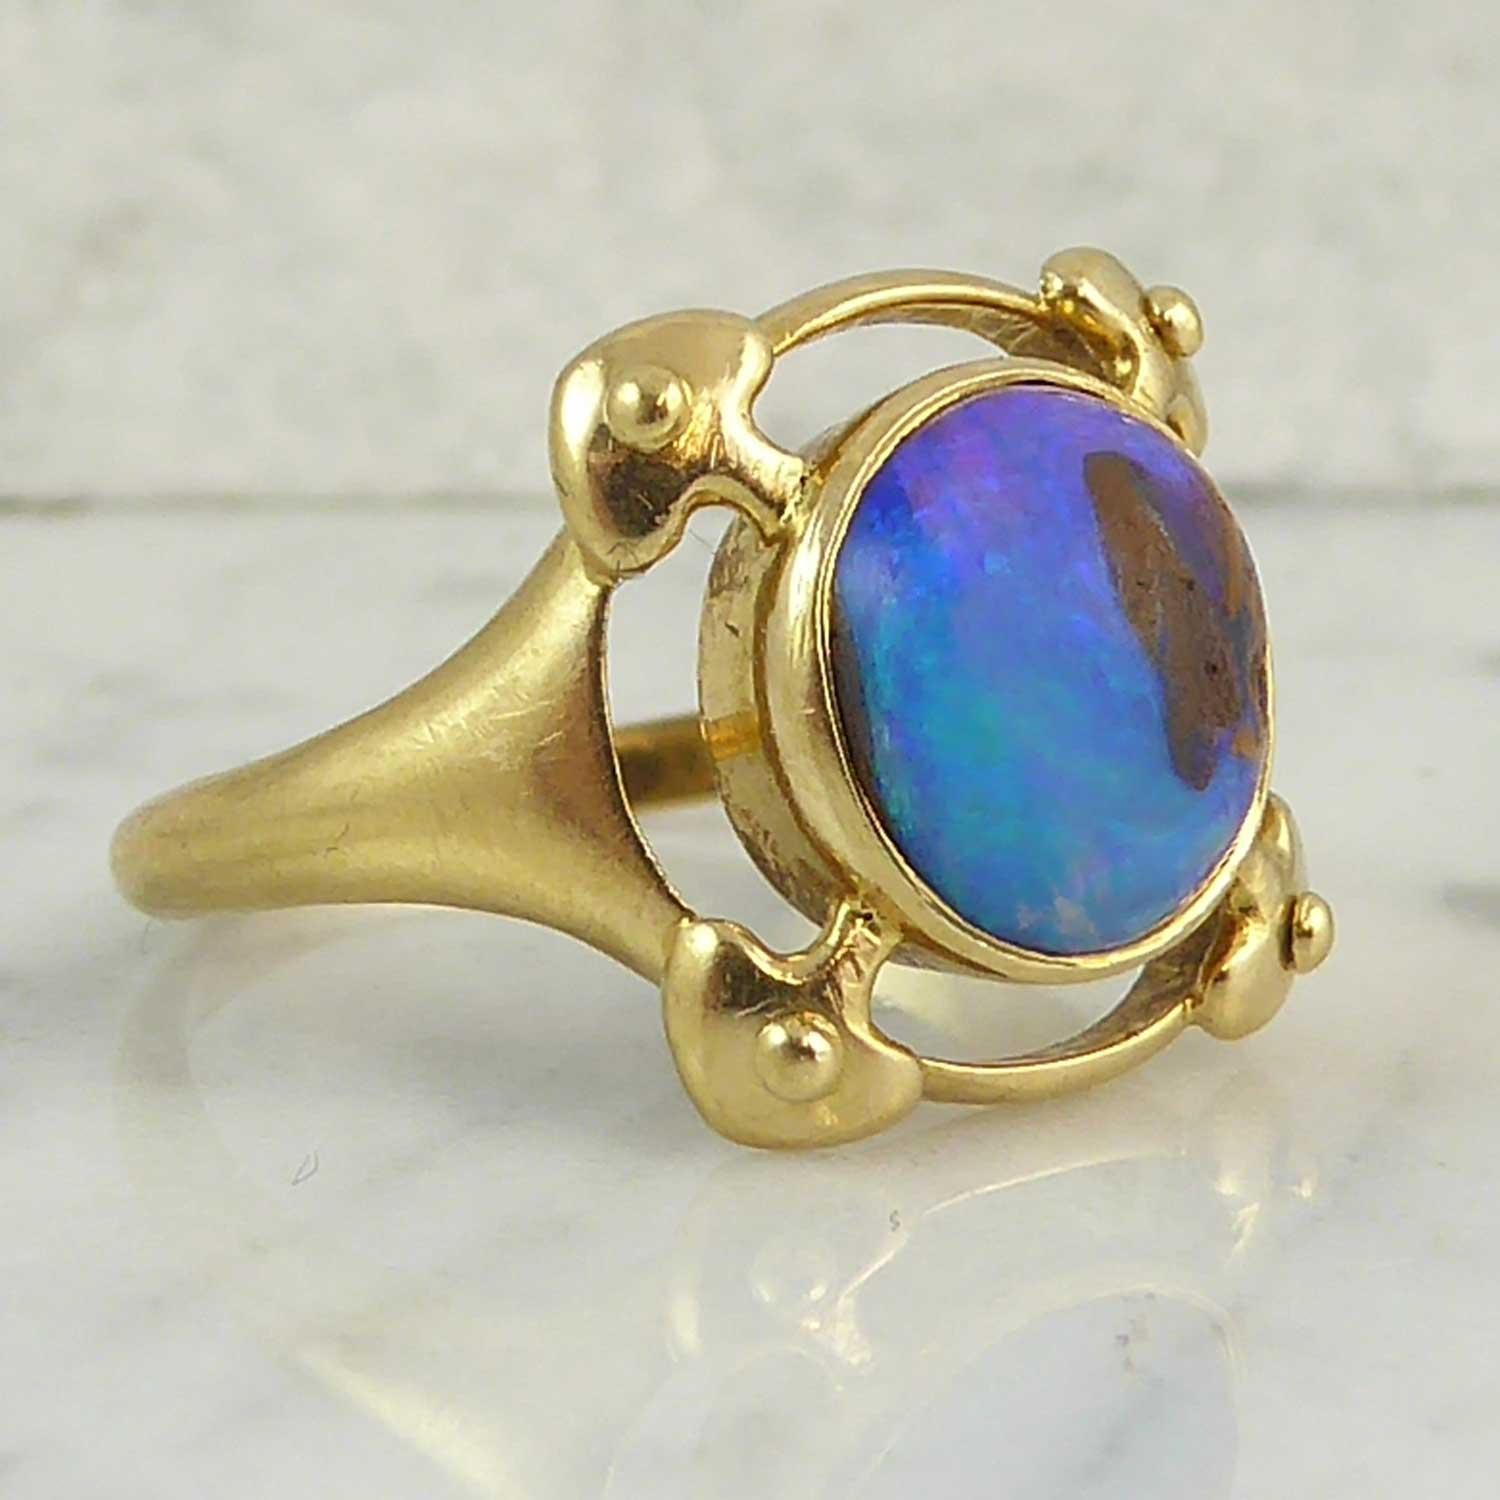 A Murrle Bennett & Co opal ring in a typical Arts and Crafts design and using a boulder opal in all its natural and unadorned beauty.  The opal shows lilac, blue and green colours arouond the boulder which sits off centre to one edge of the